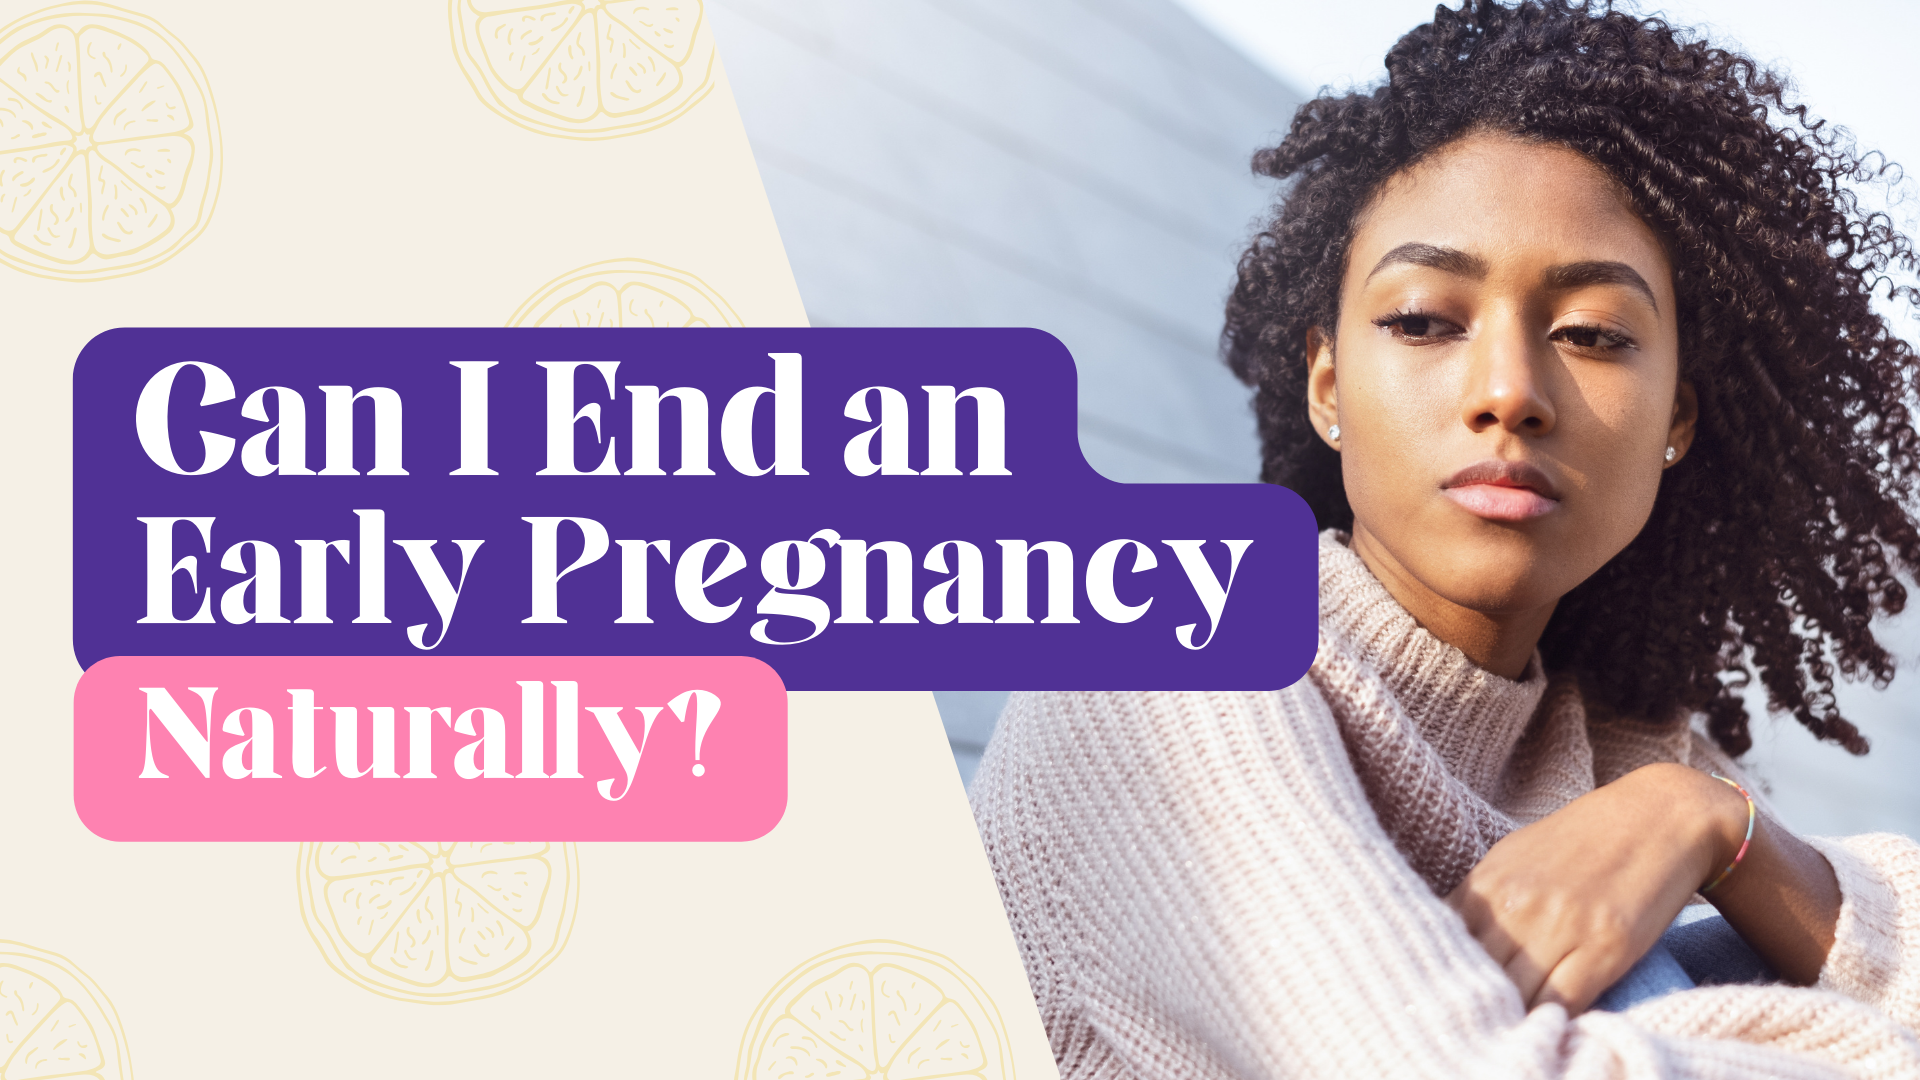 Can I End an Early Pregnancy Naturally?
Tags:
Can I end an early pregnancy naturally? Terminate pregnancy naturally. Natural abortion. Safe abortion with natural remedies. Can I have a miscarriage naturally.

